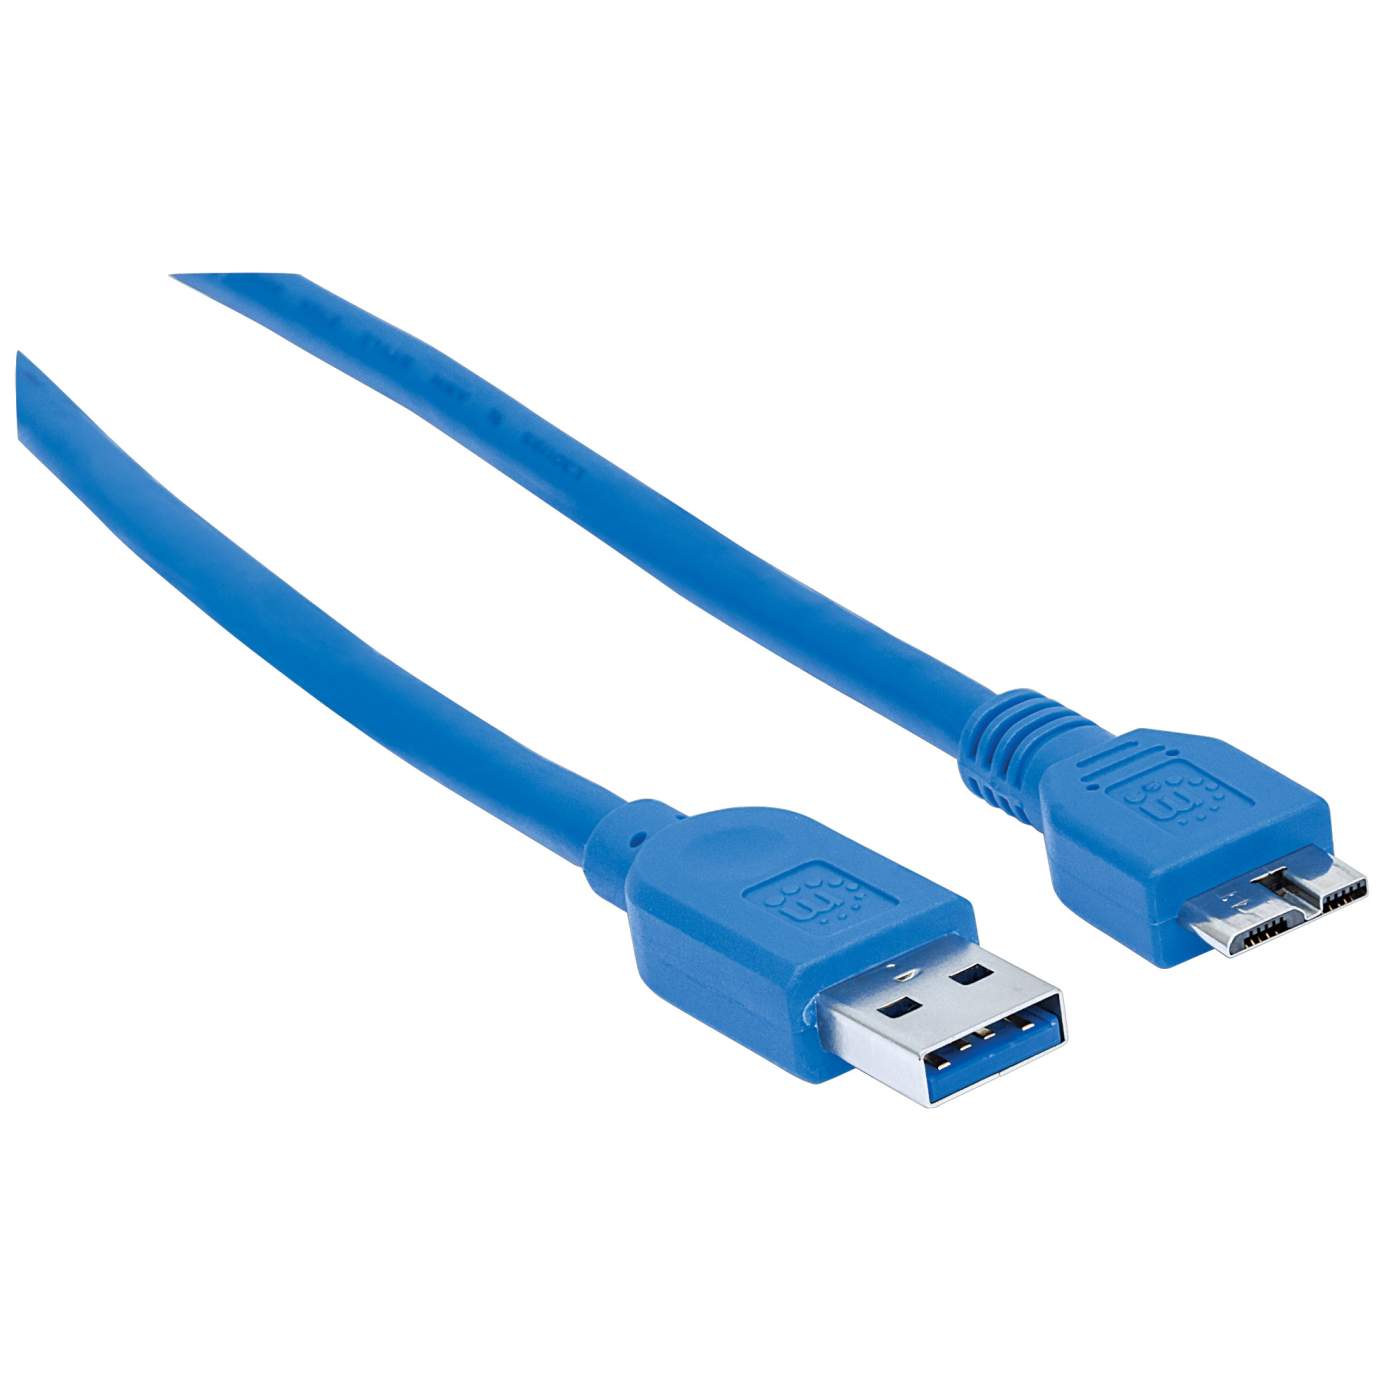 USB 3.0 Type-A to Micro-USB Cable Image 3